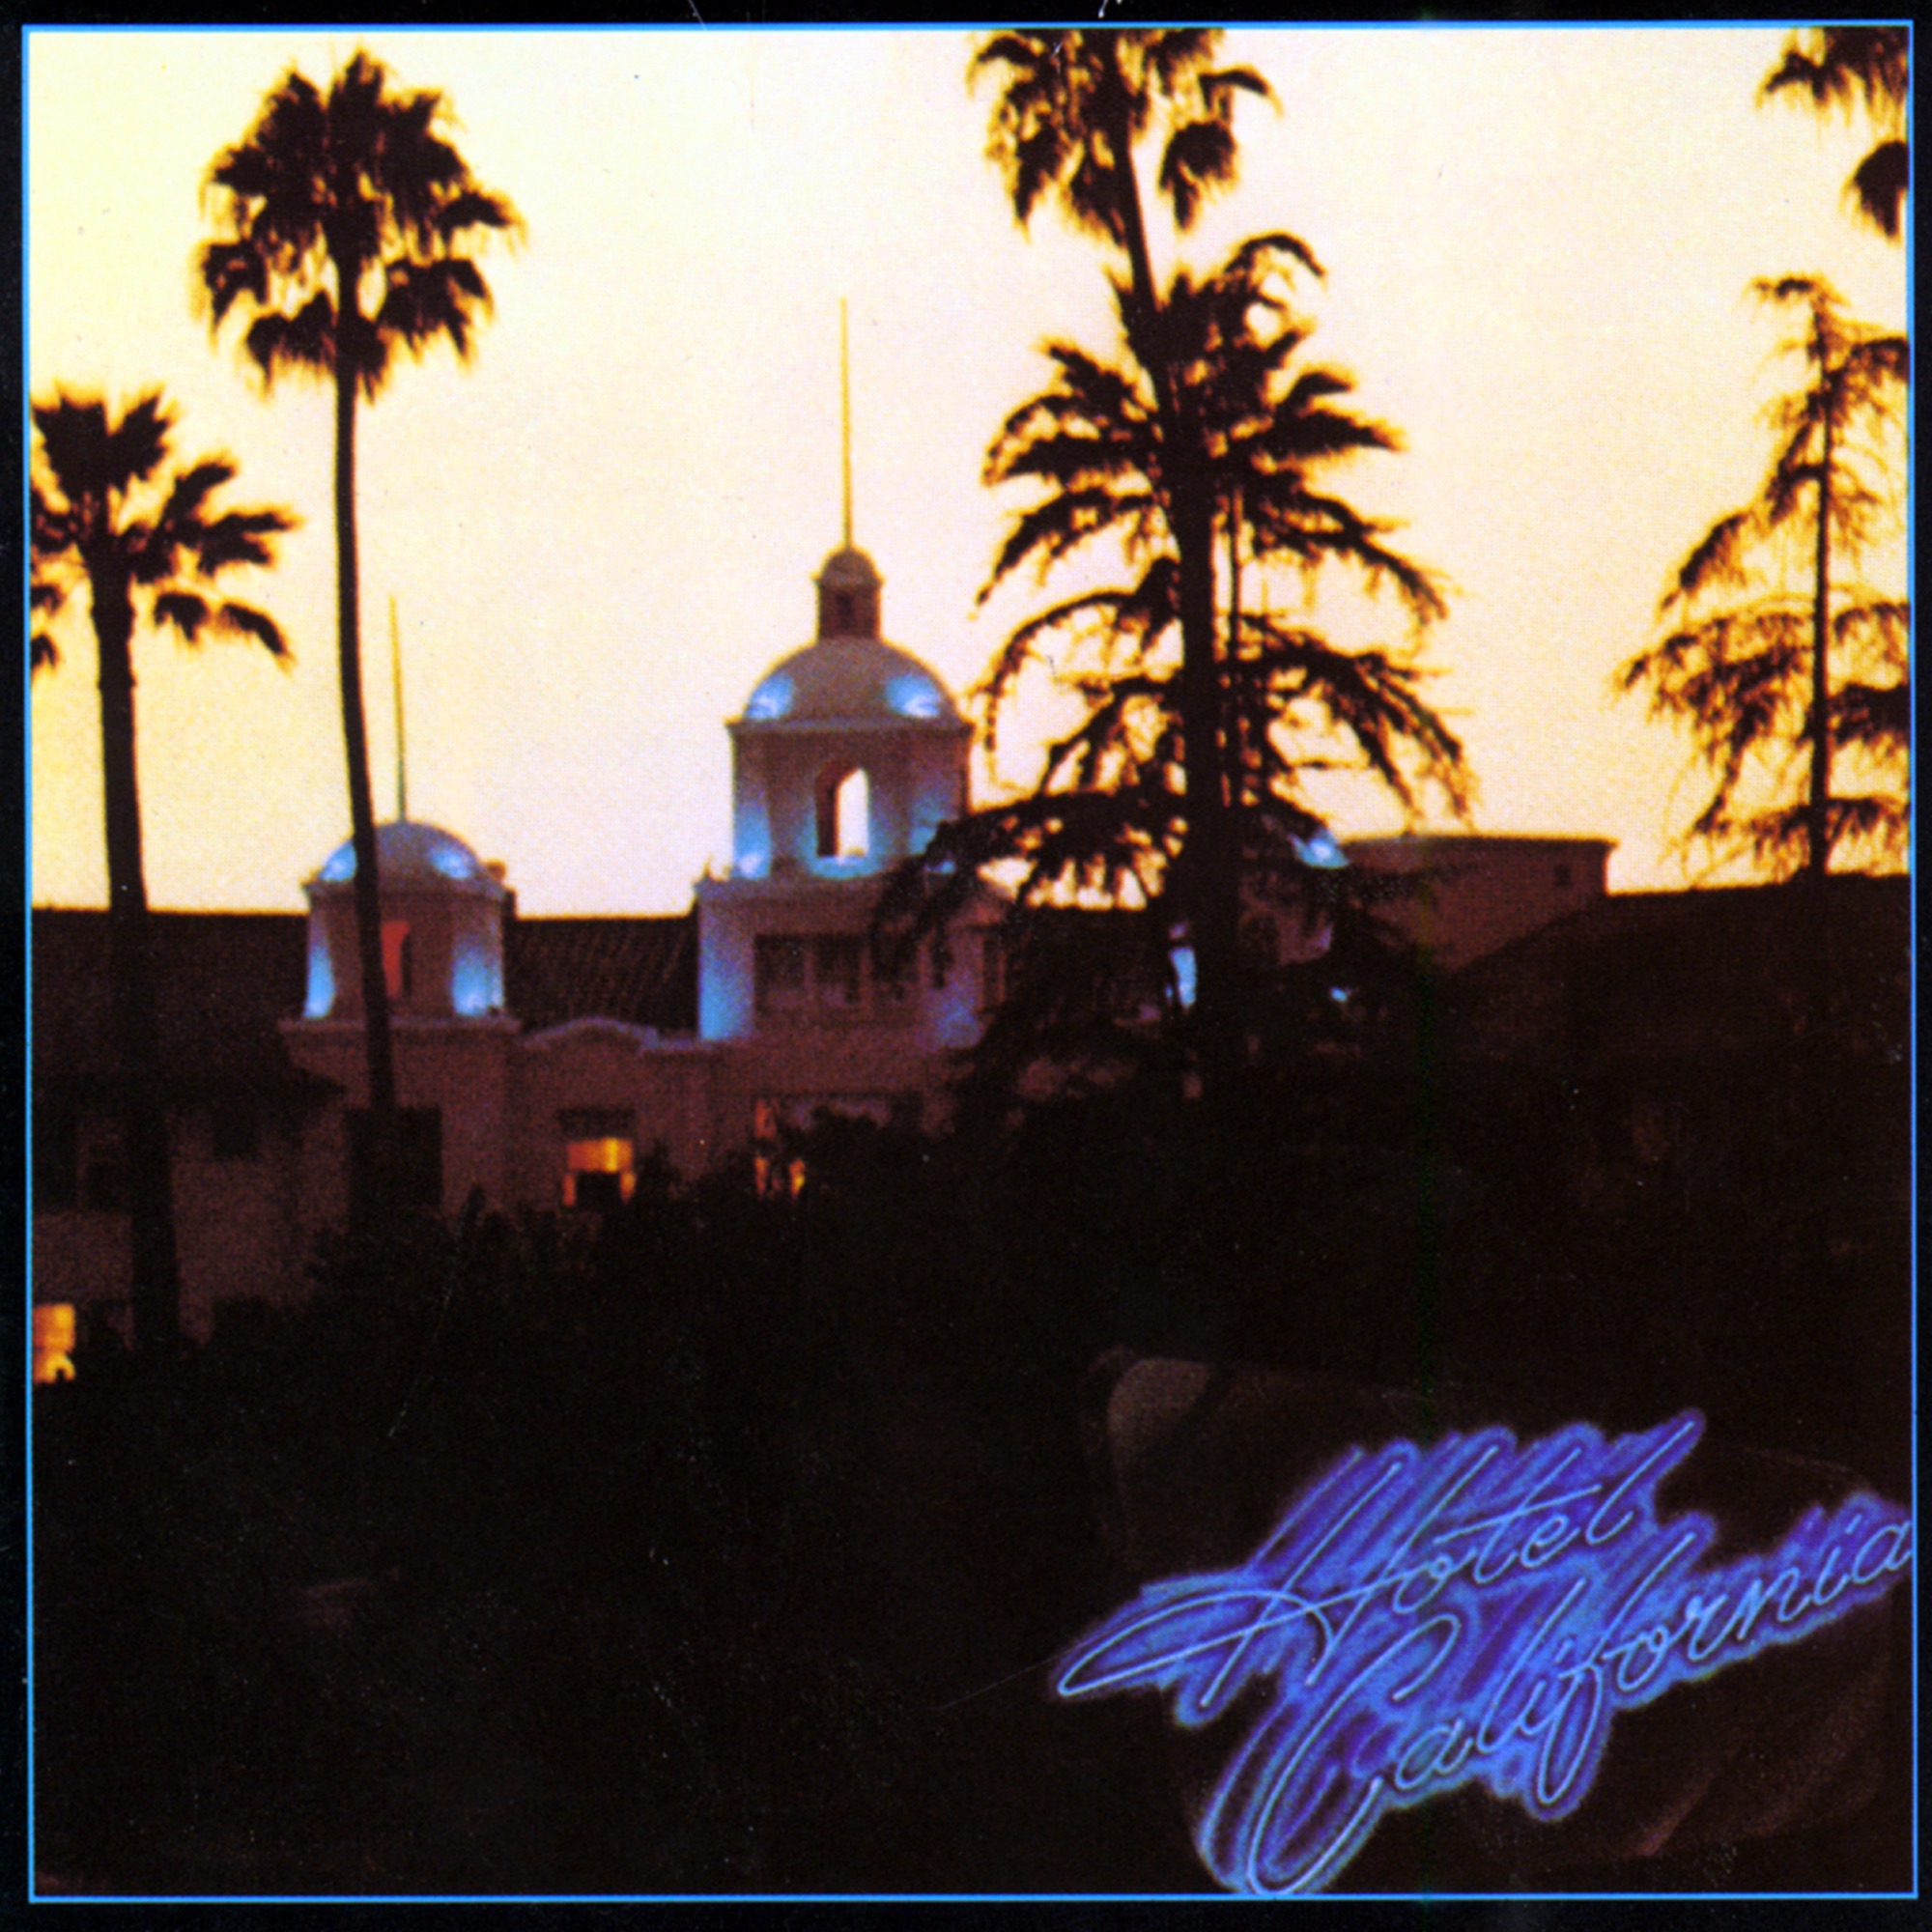 Art for Hotel California by Eagles